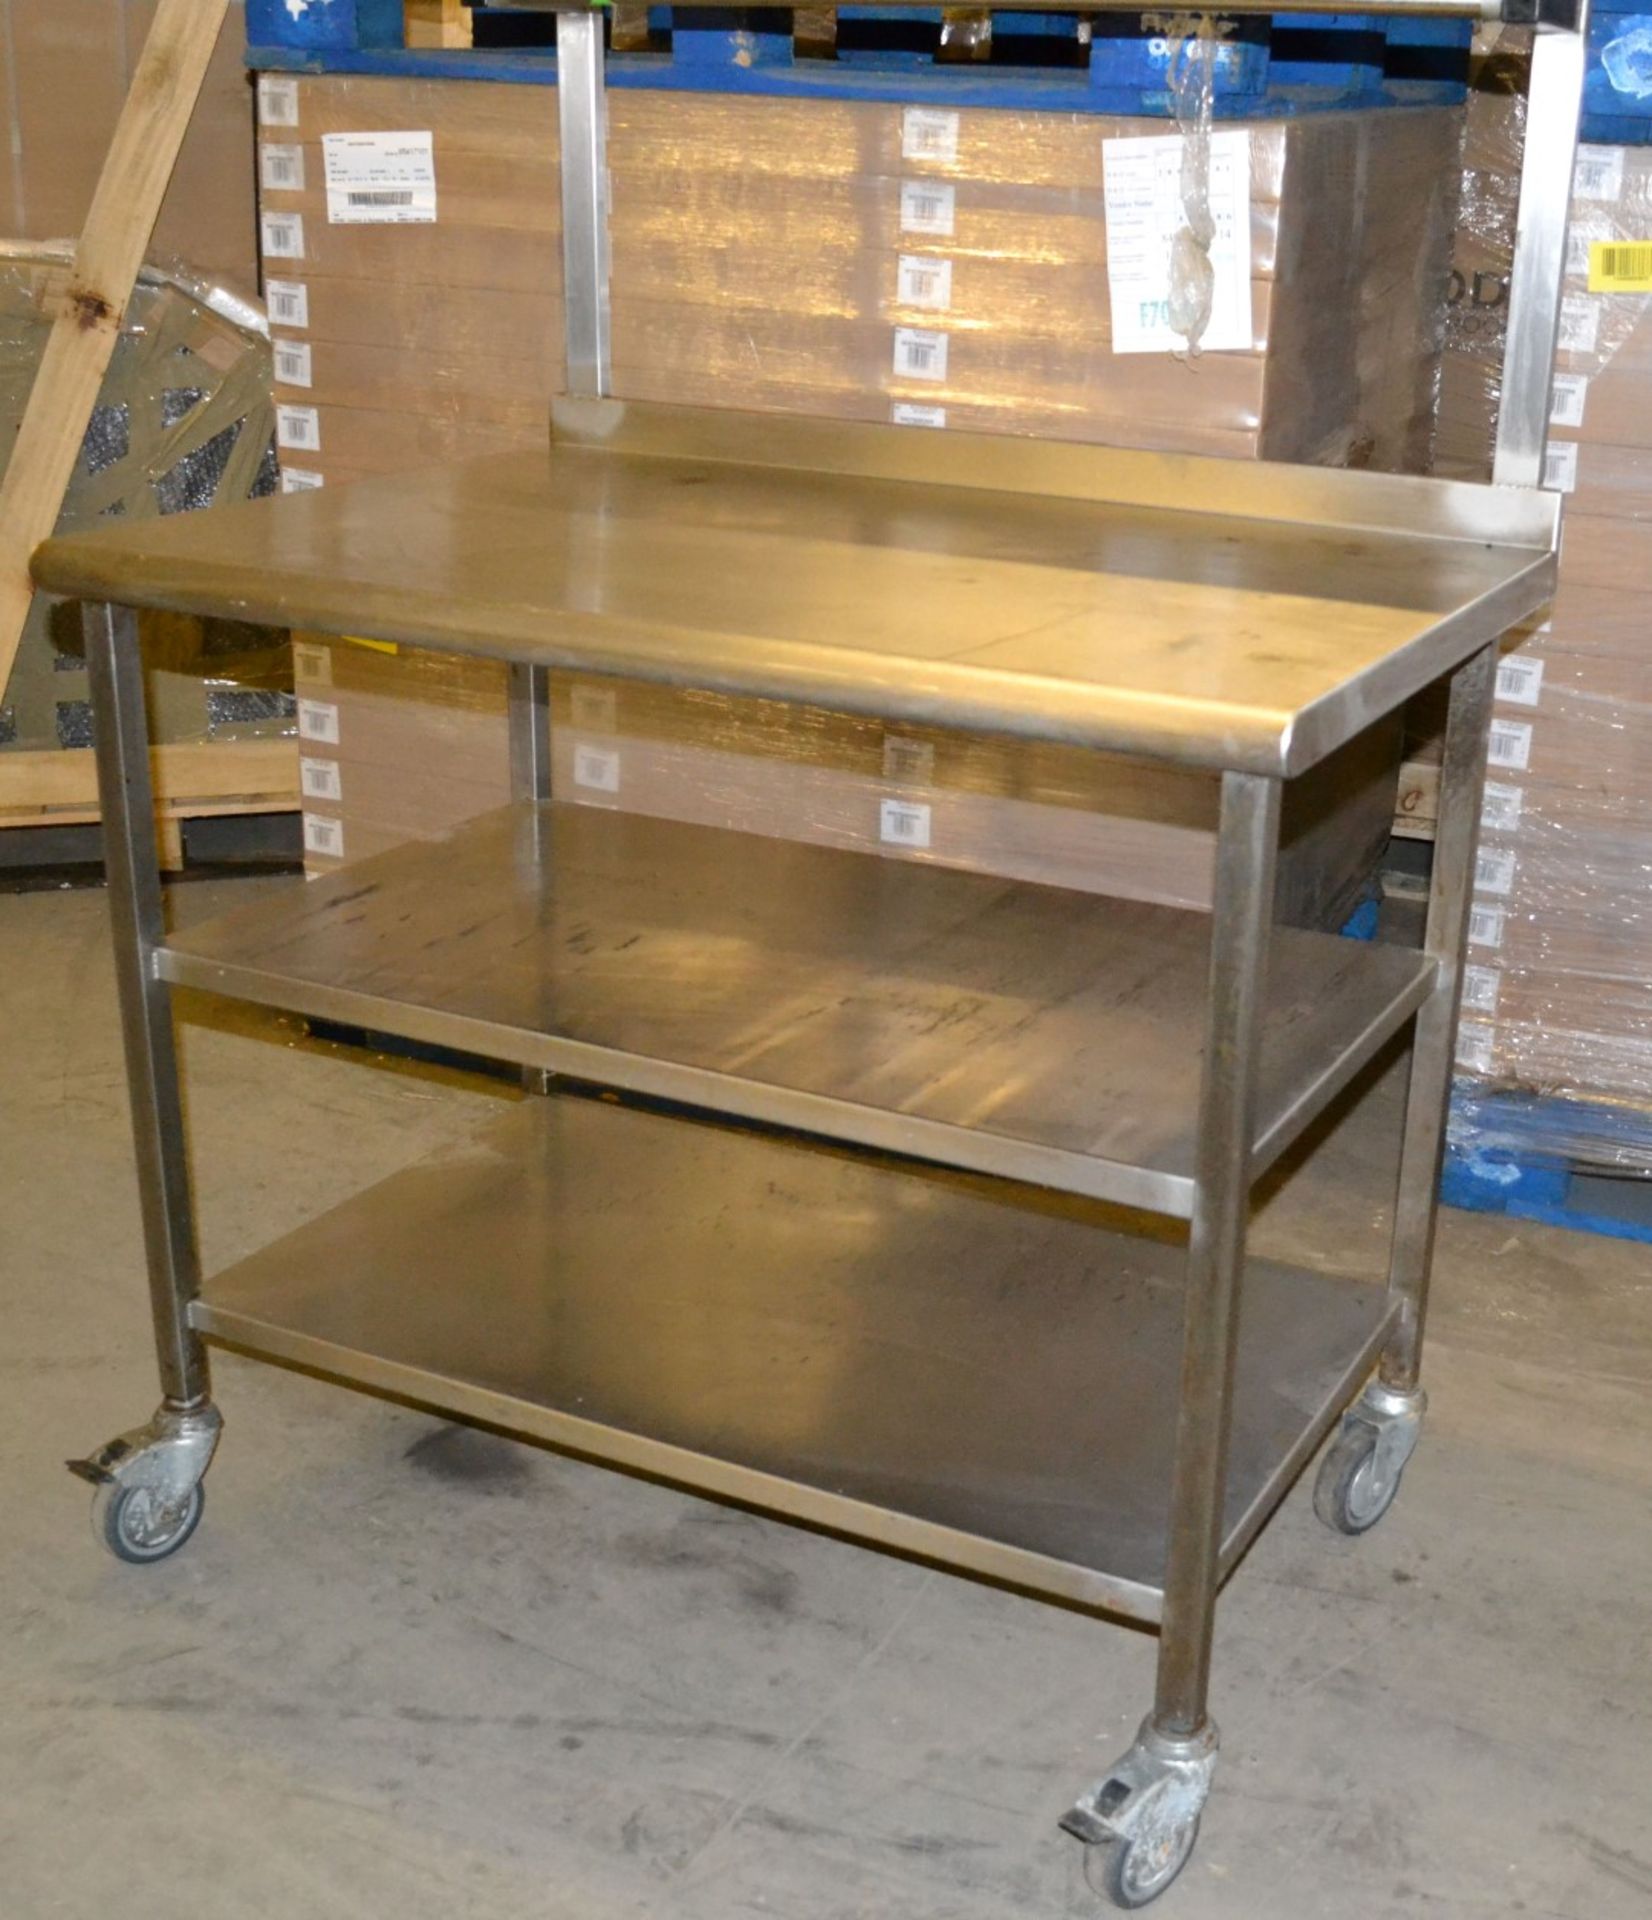 1 x Wheeled Stainless Steel Prep Table - Dimensions: 100 x 69.5 x 148cm - Ref: MC120 - CL282 - Locat - Image 8 of 11